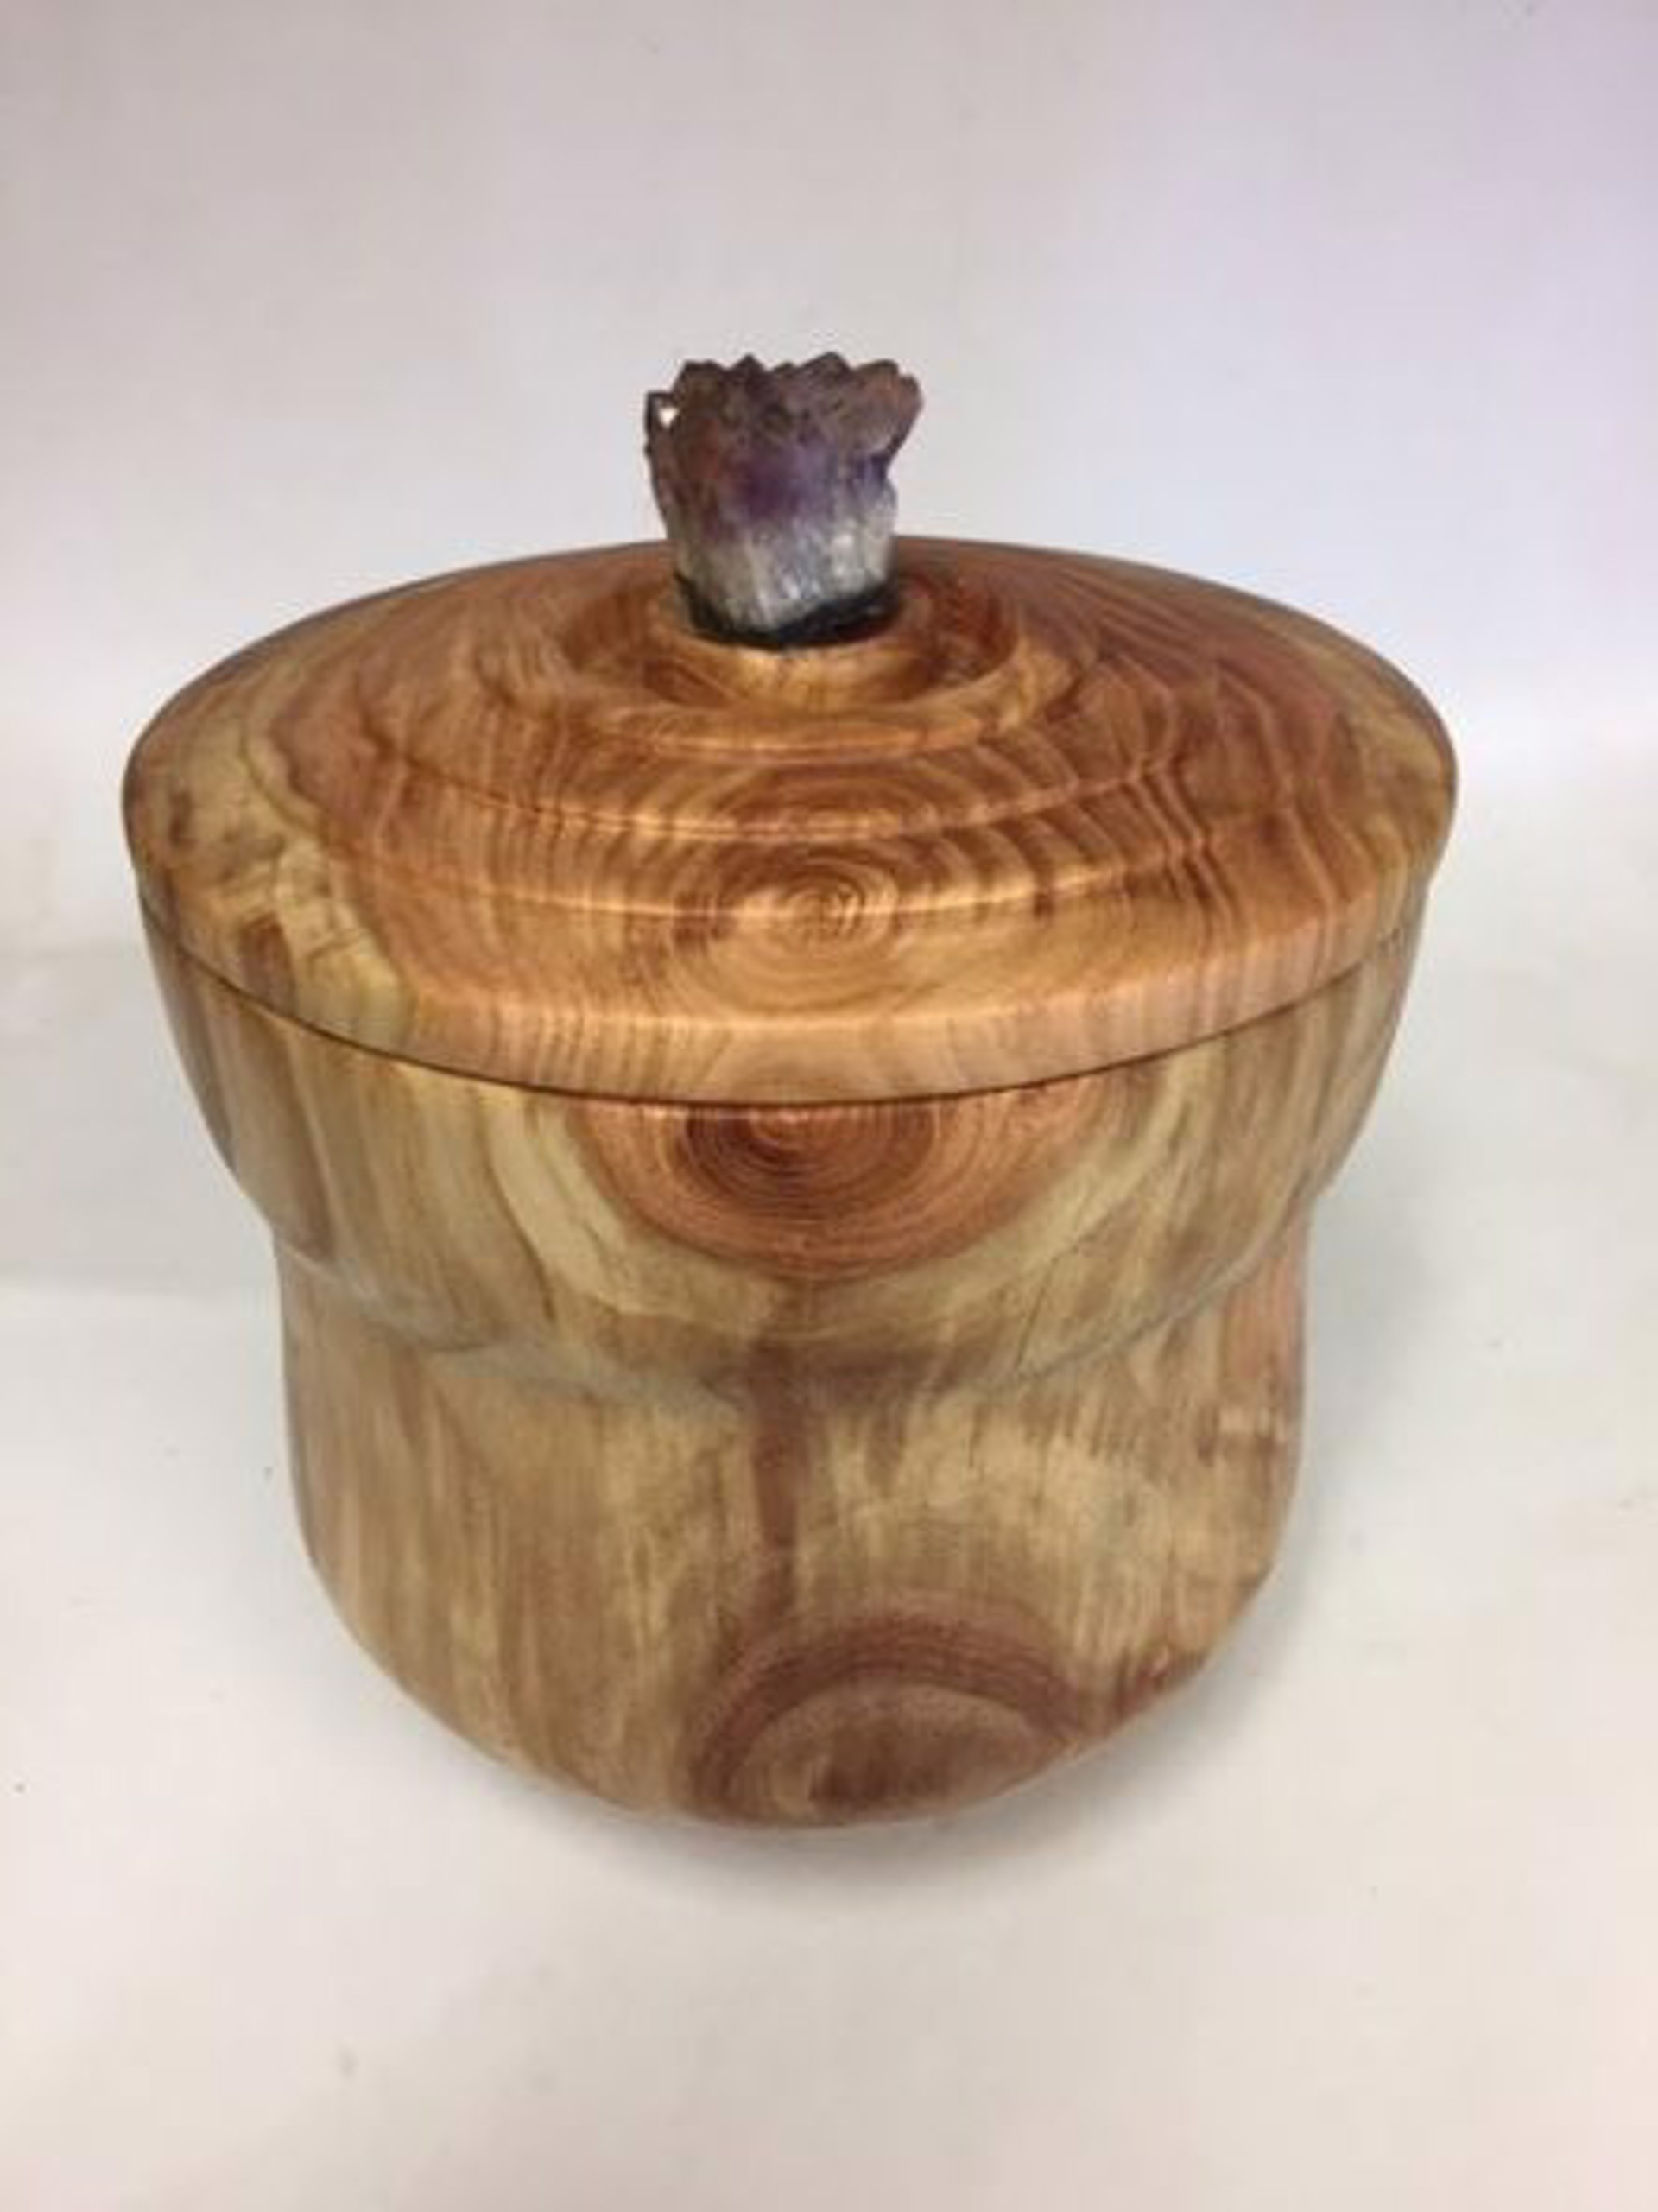 Turned Wood Jar W/Lid 19-42 by Rick Squires